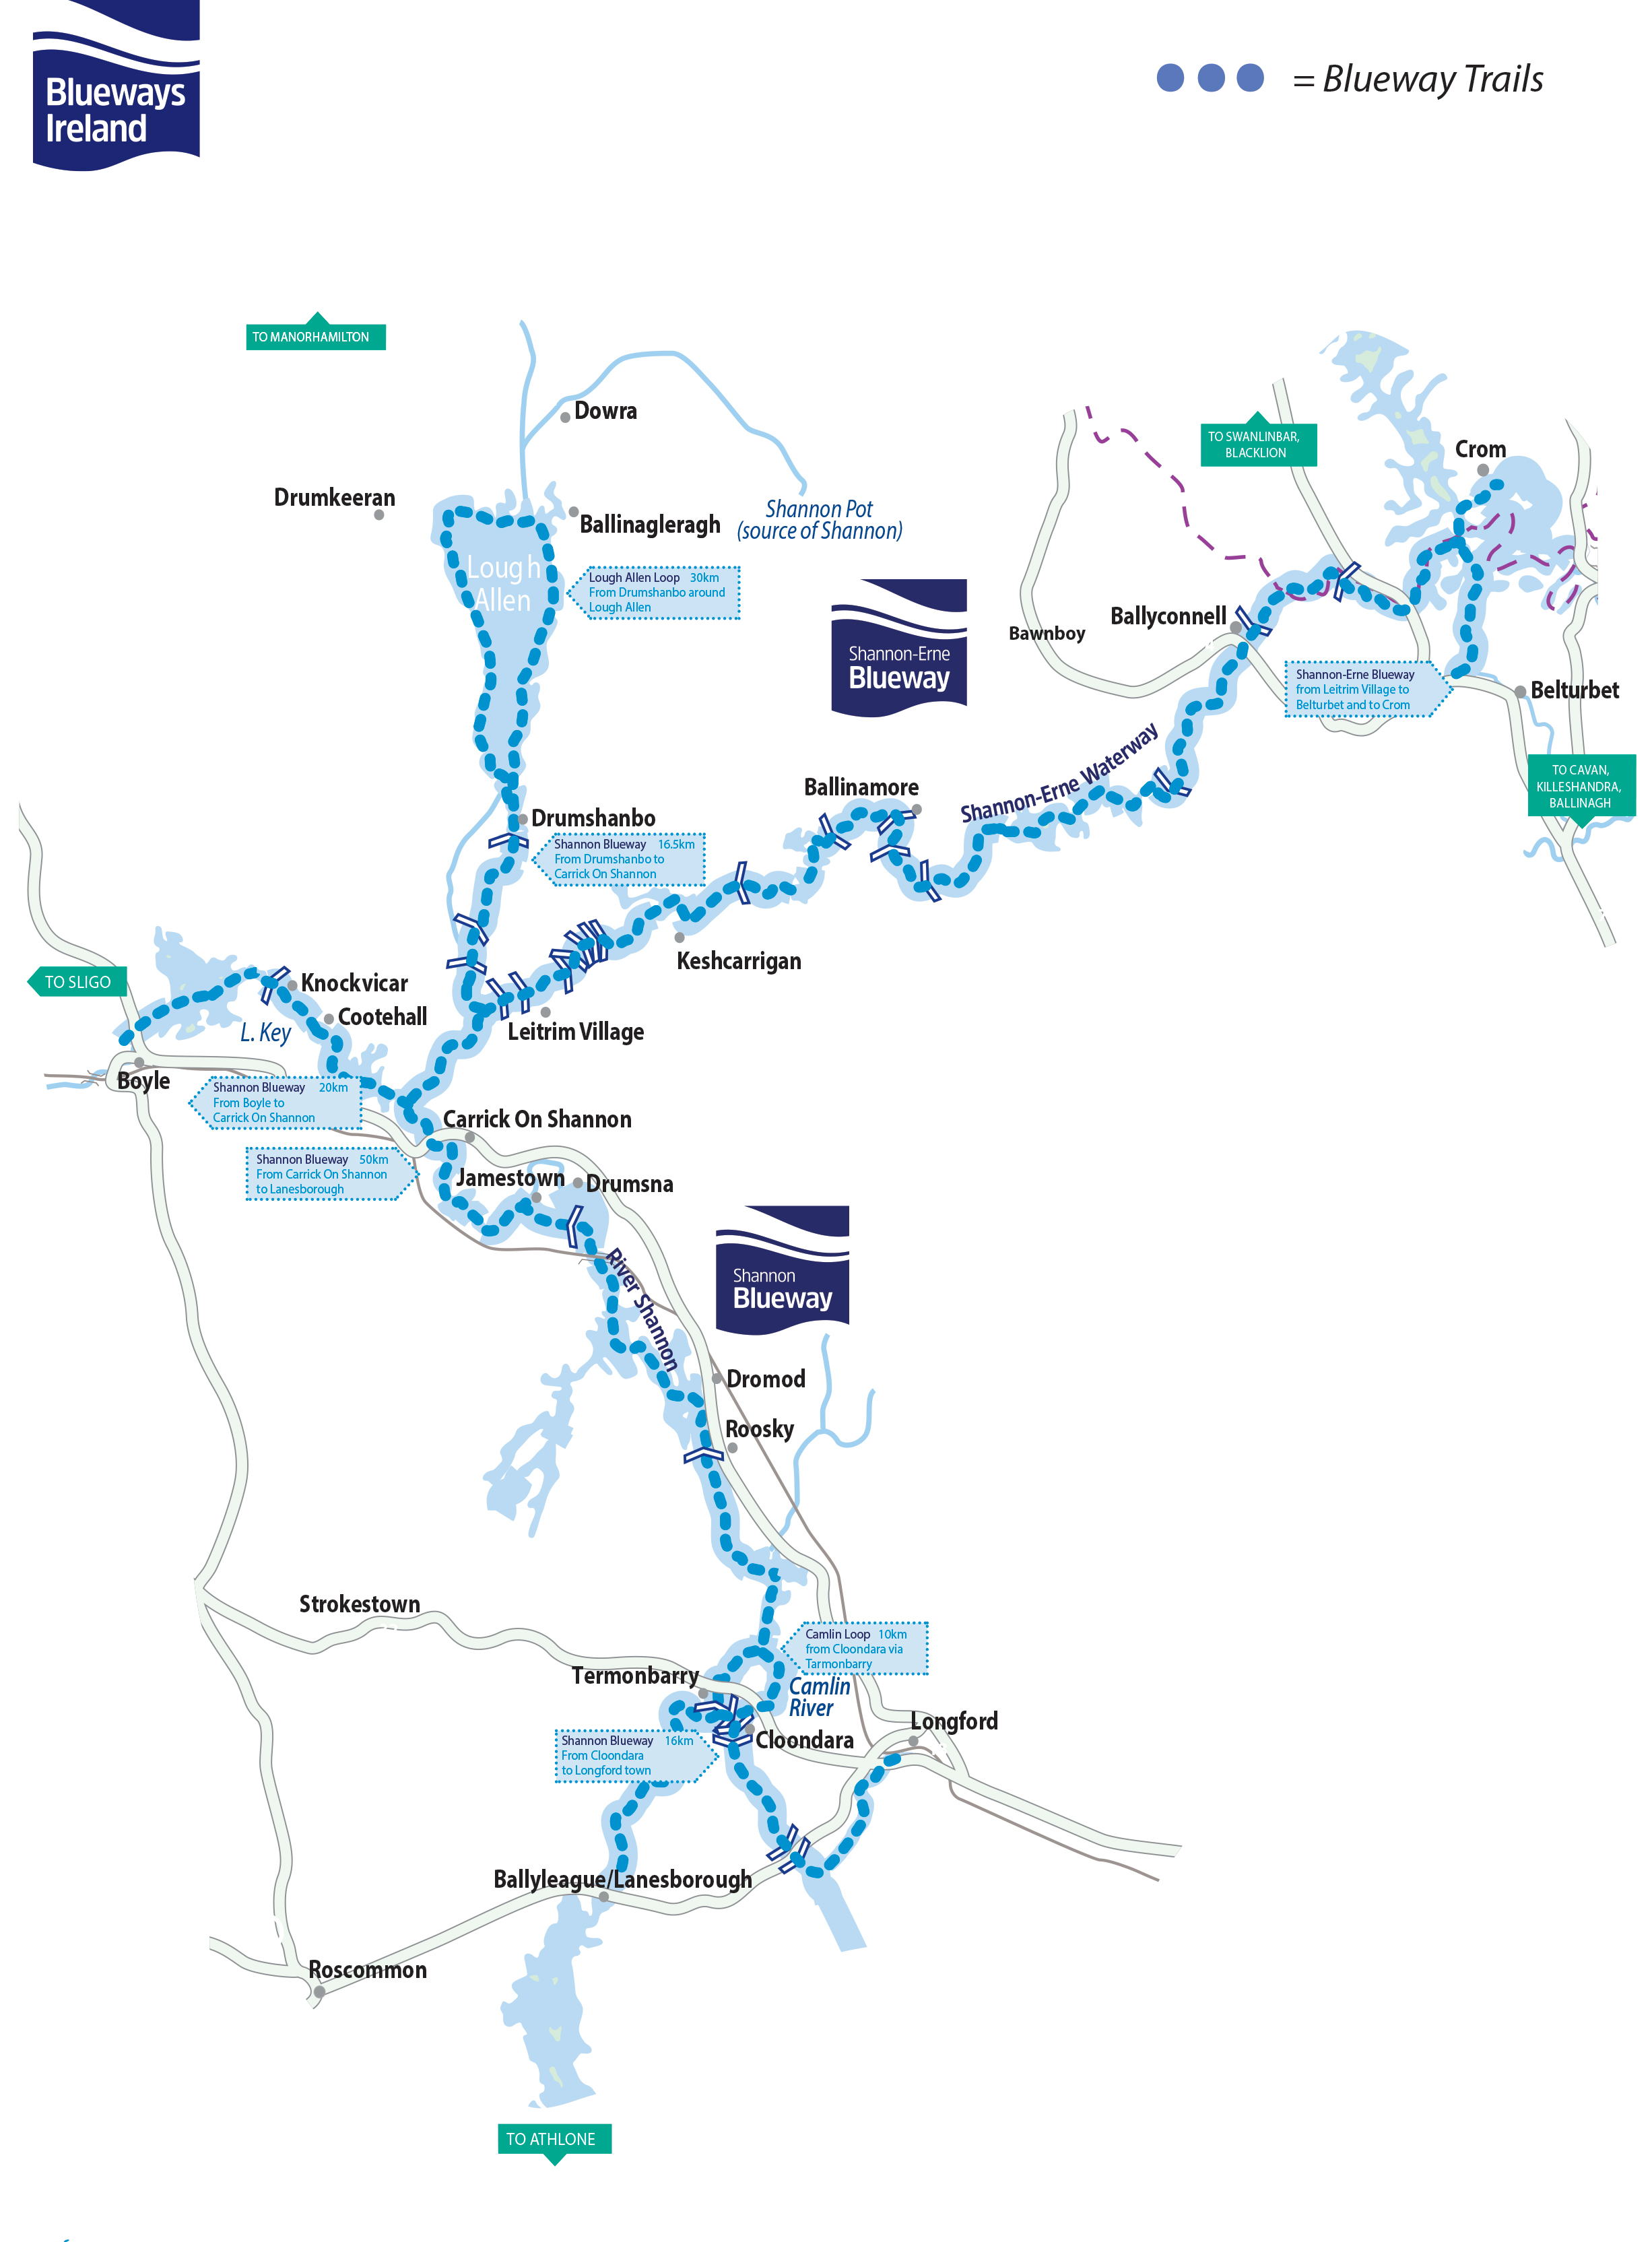 shannon river cruise map